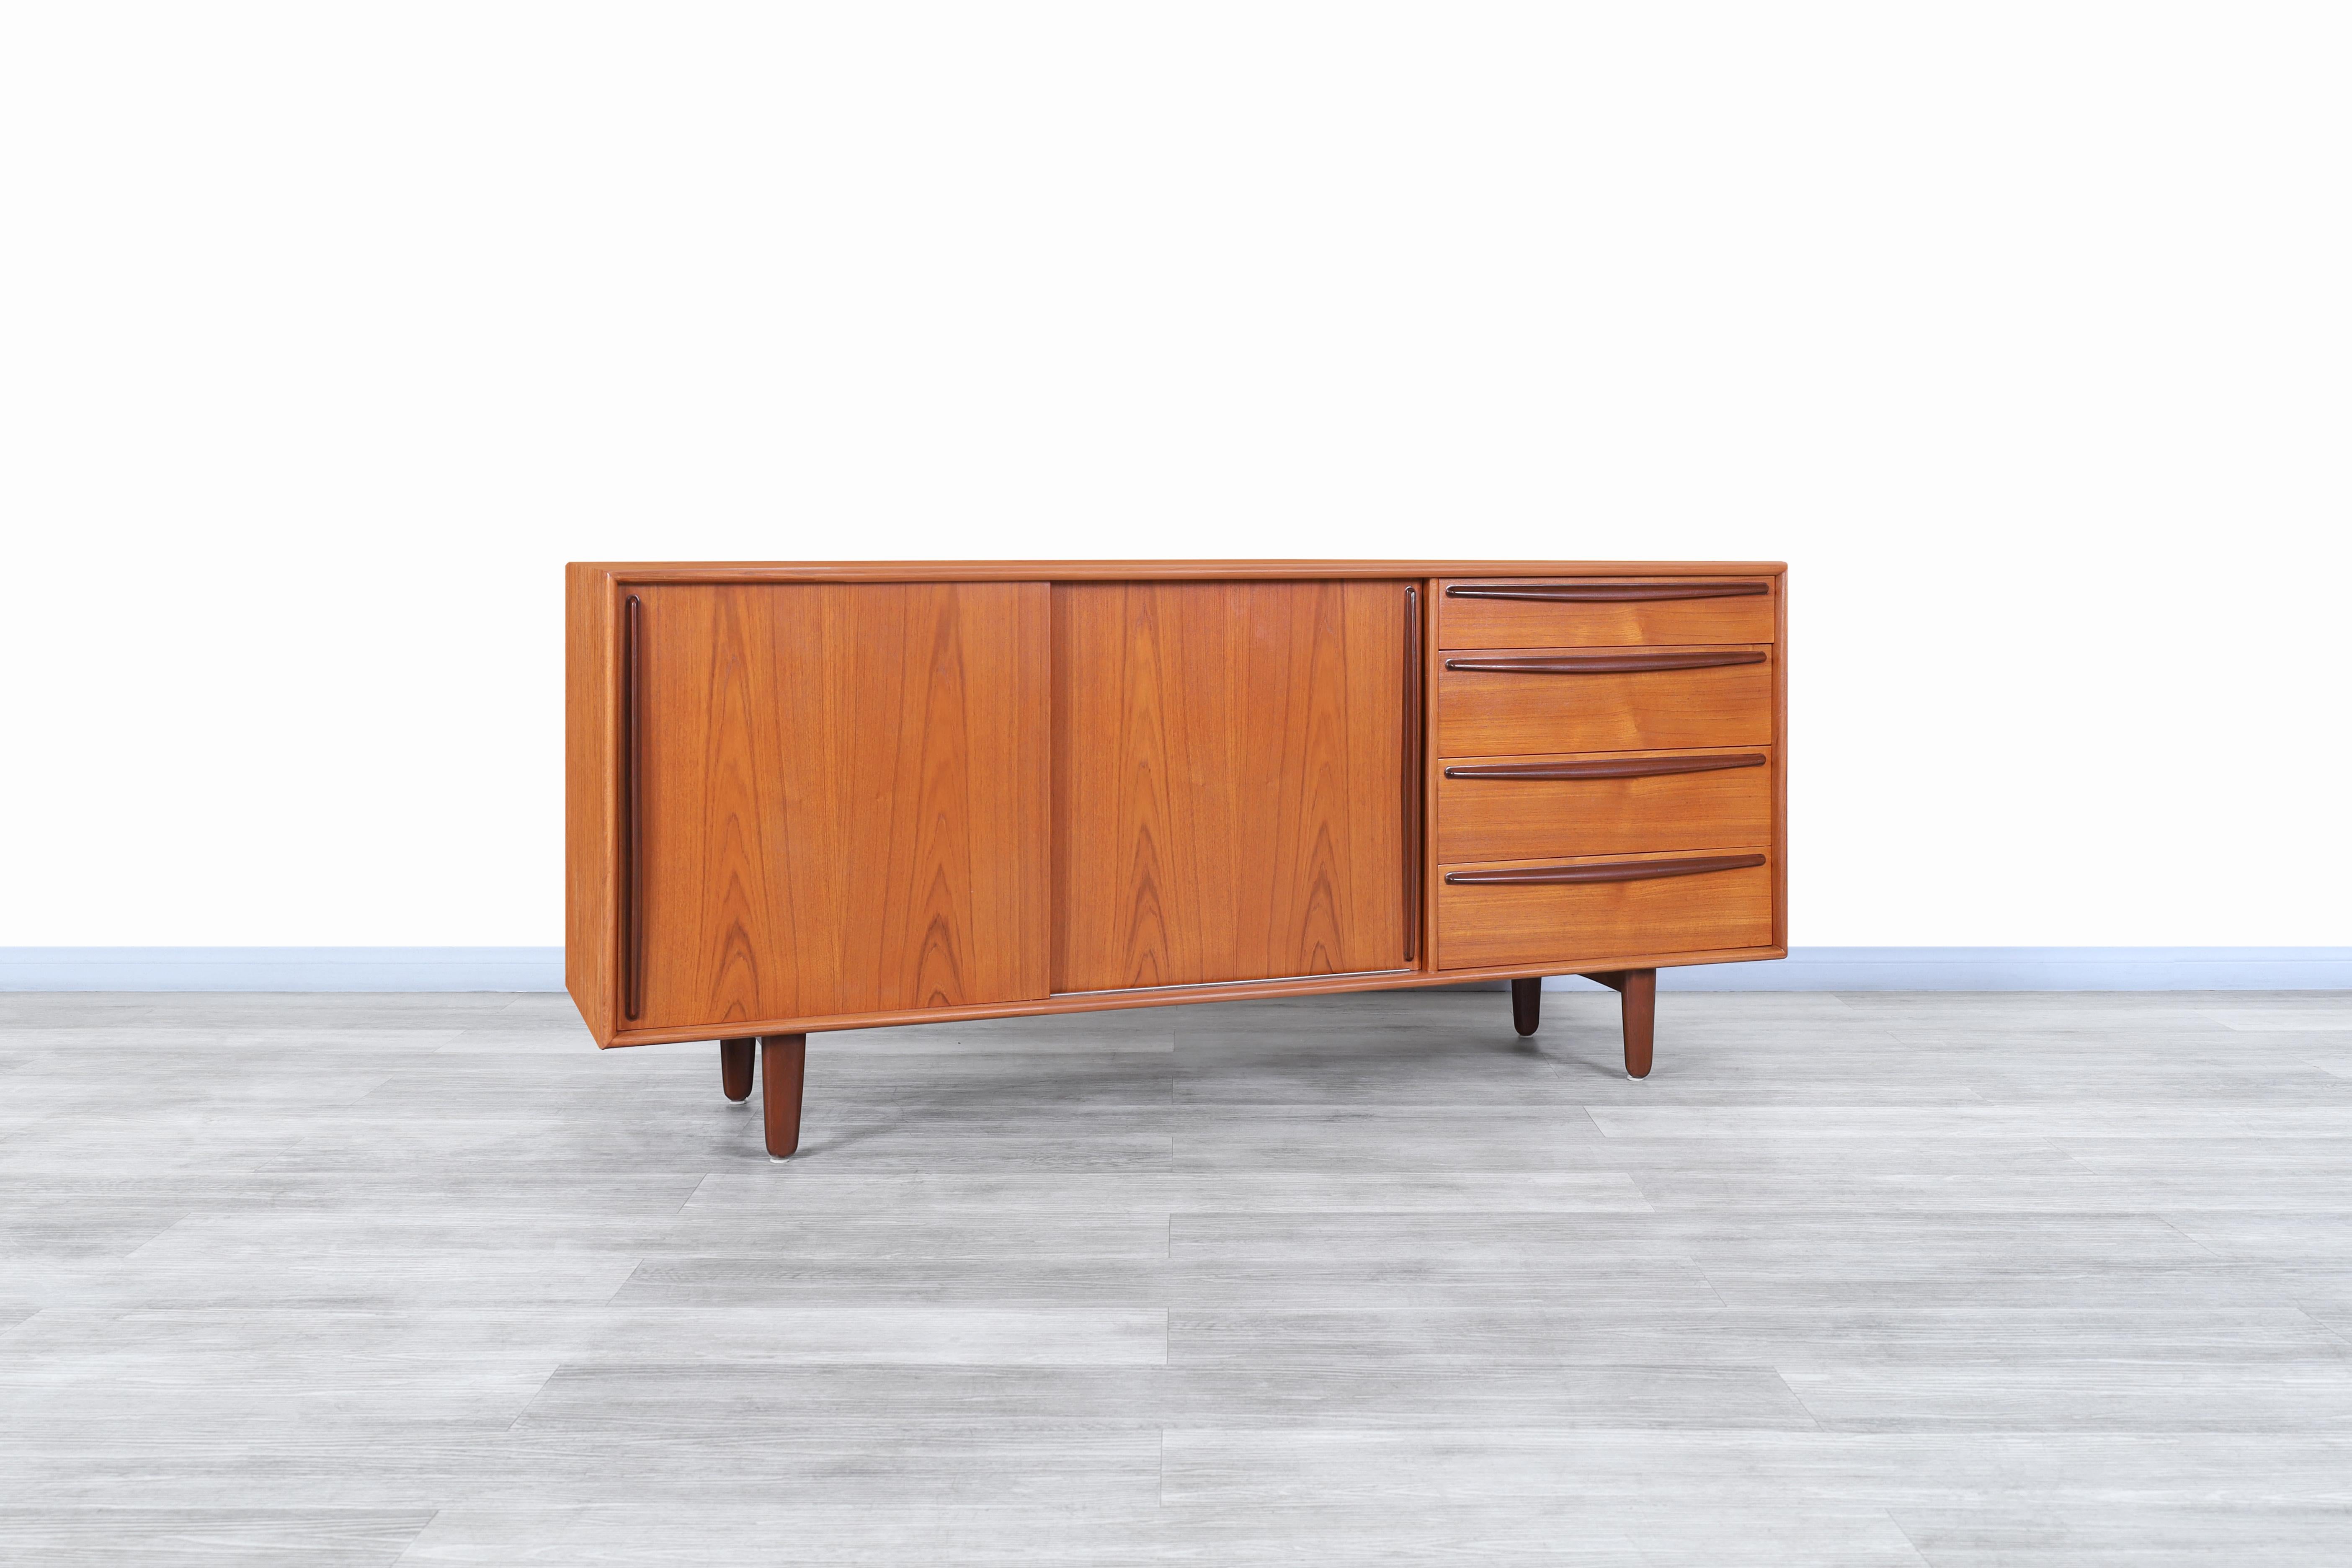 Fabulous Danish modern teak credenza designed by Svend Age Madsen for Falster Møbelfabrik in Denmark, circa 1960s. This credenza has a design that stands out for the versatility and the quality of the teak wood used for its construction. Features